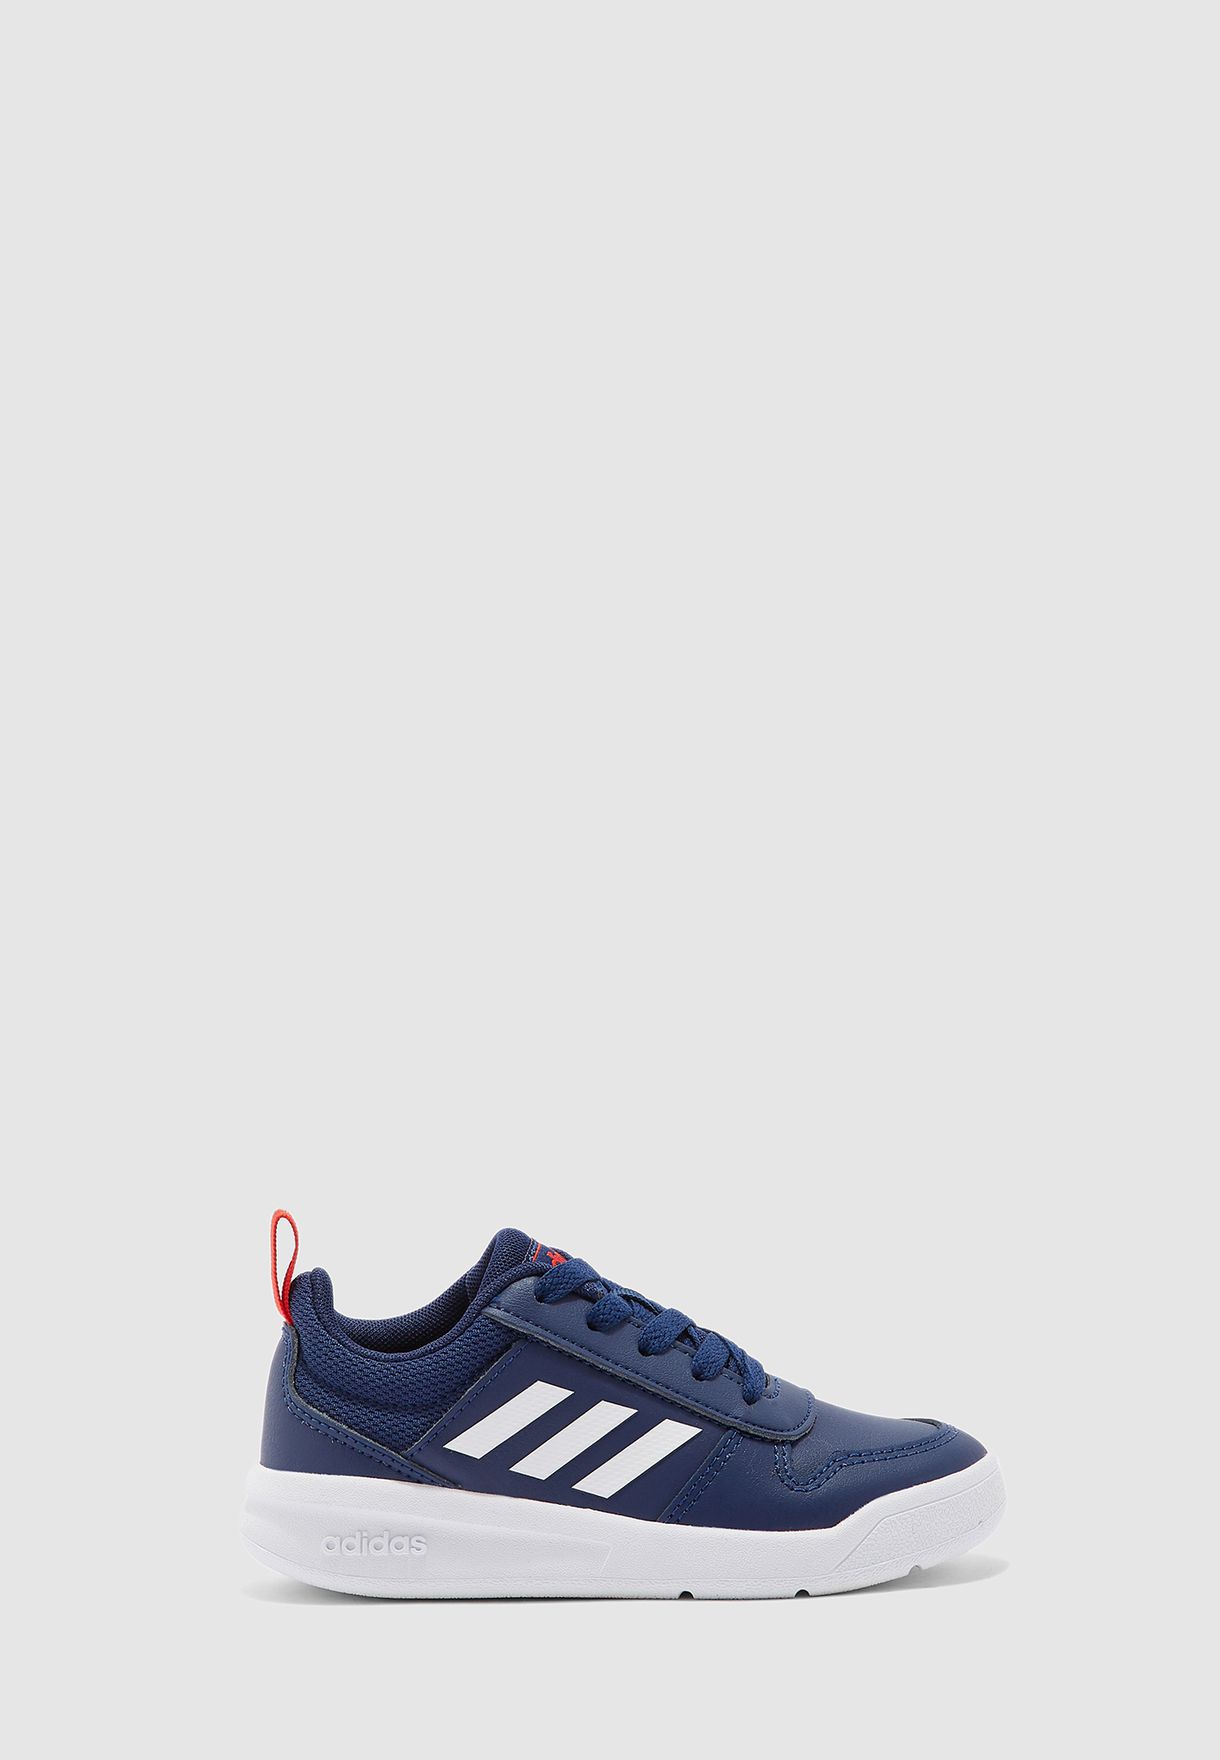 adidas all sports shoes